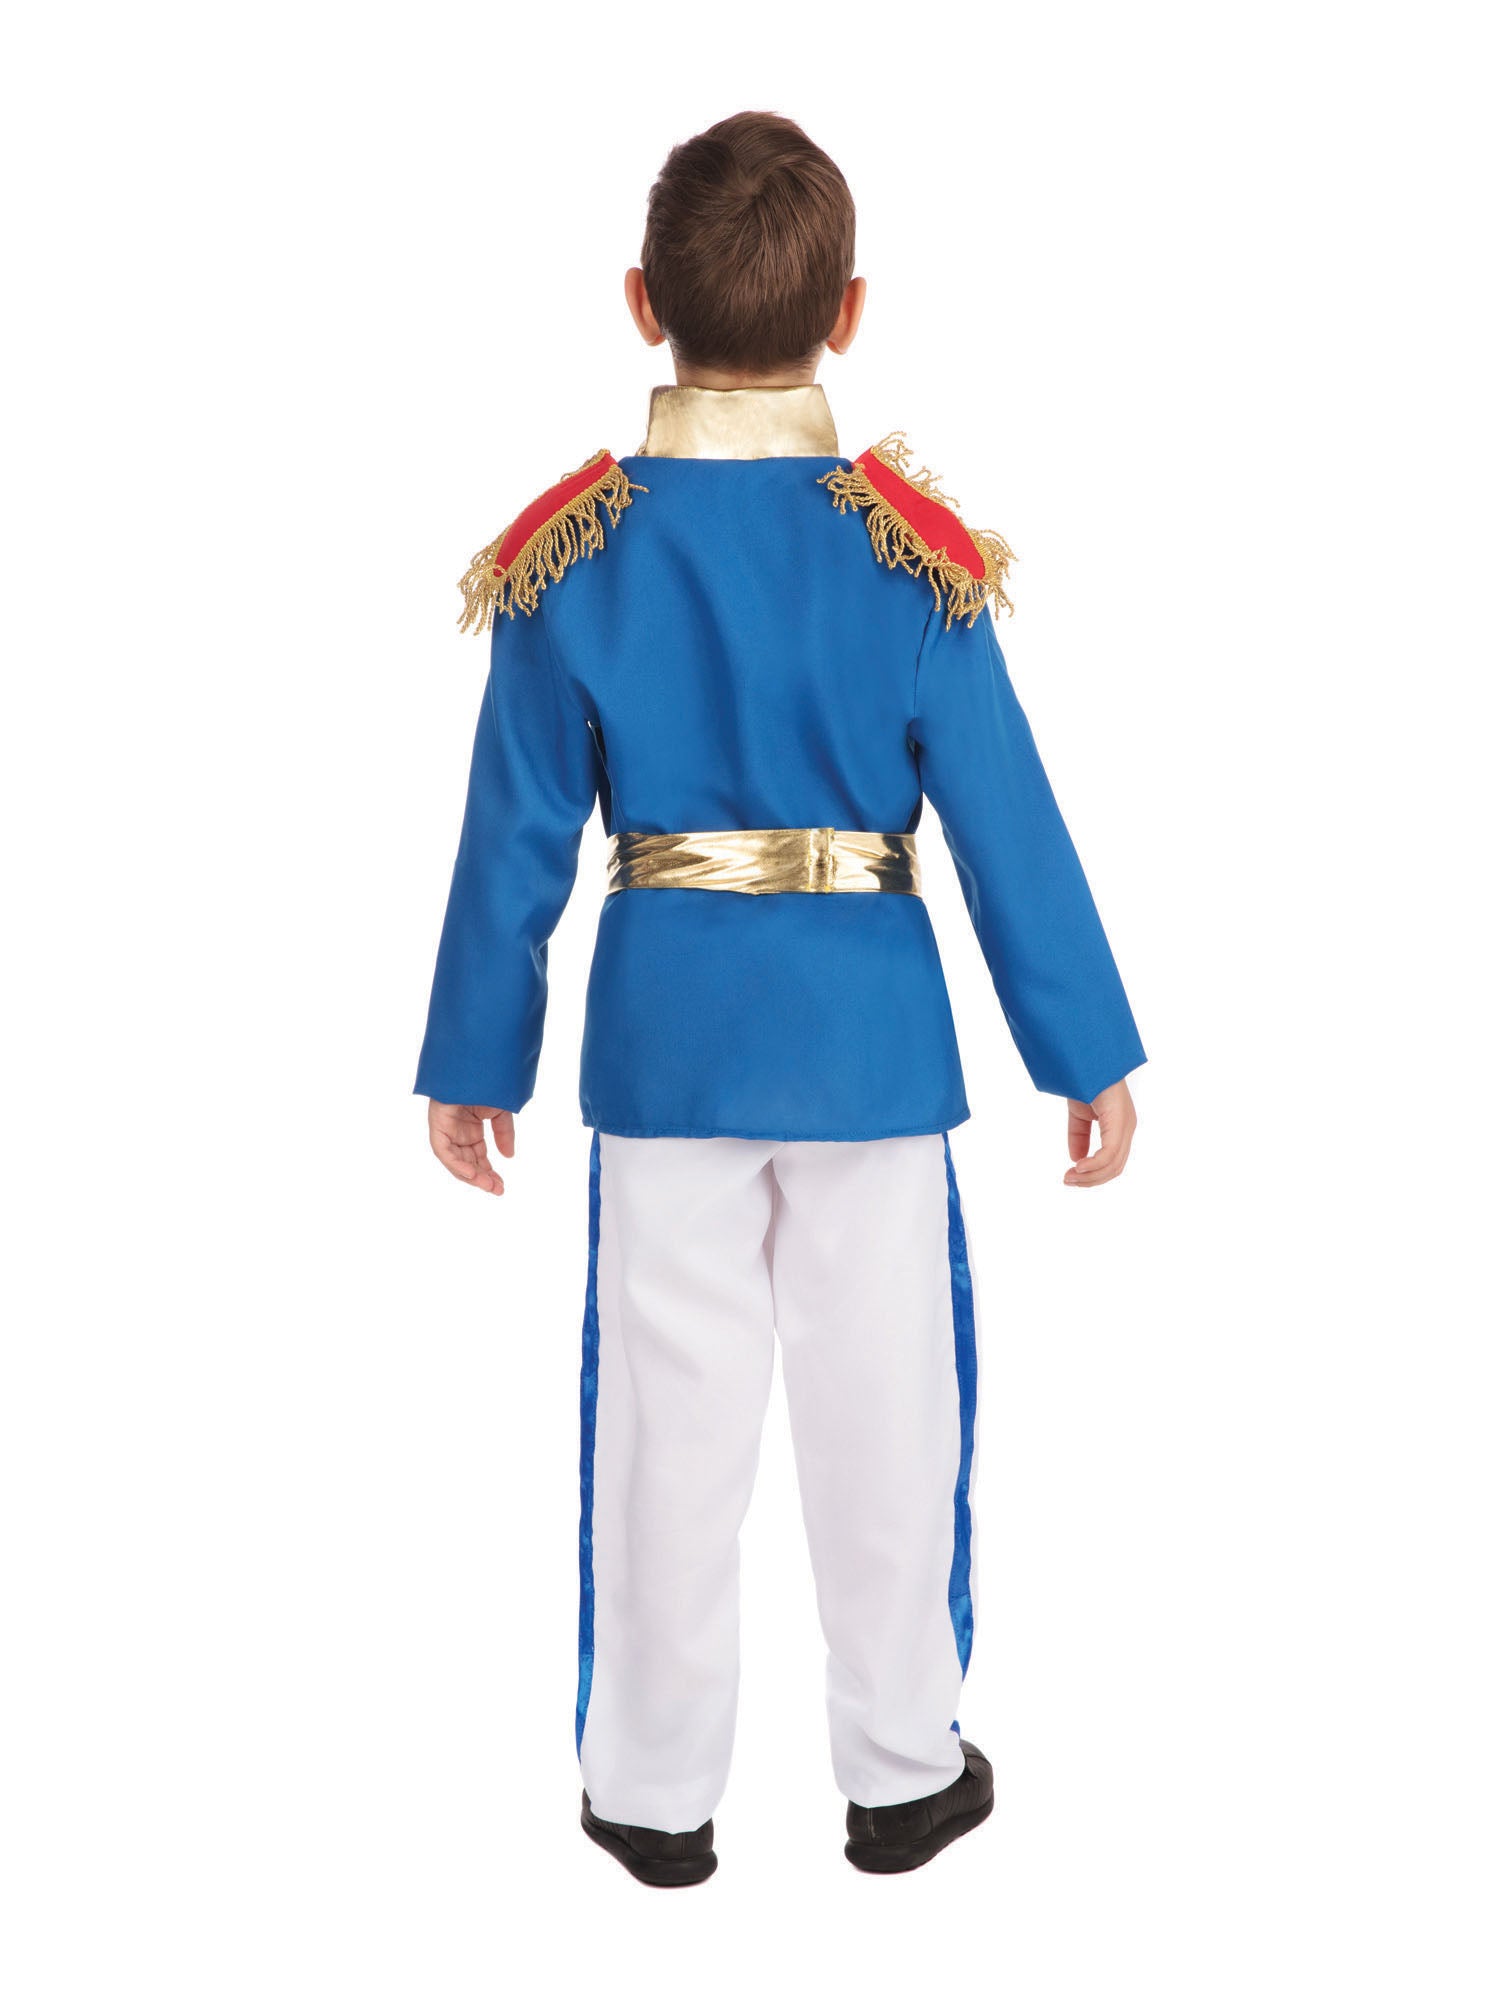 Prince, Multi, Generic, Kids Costumes, Large, Other